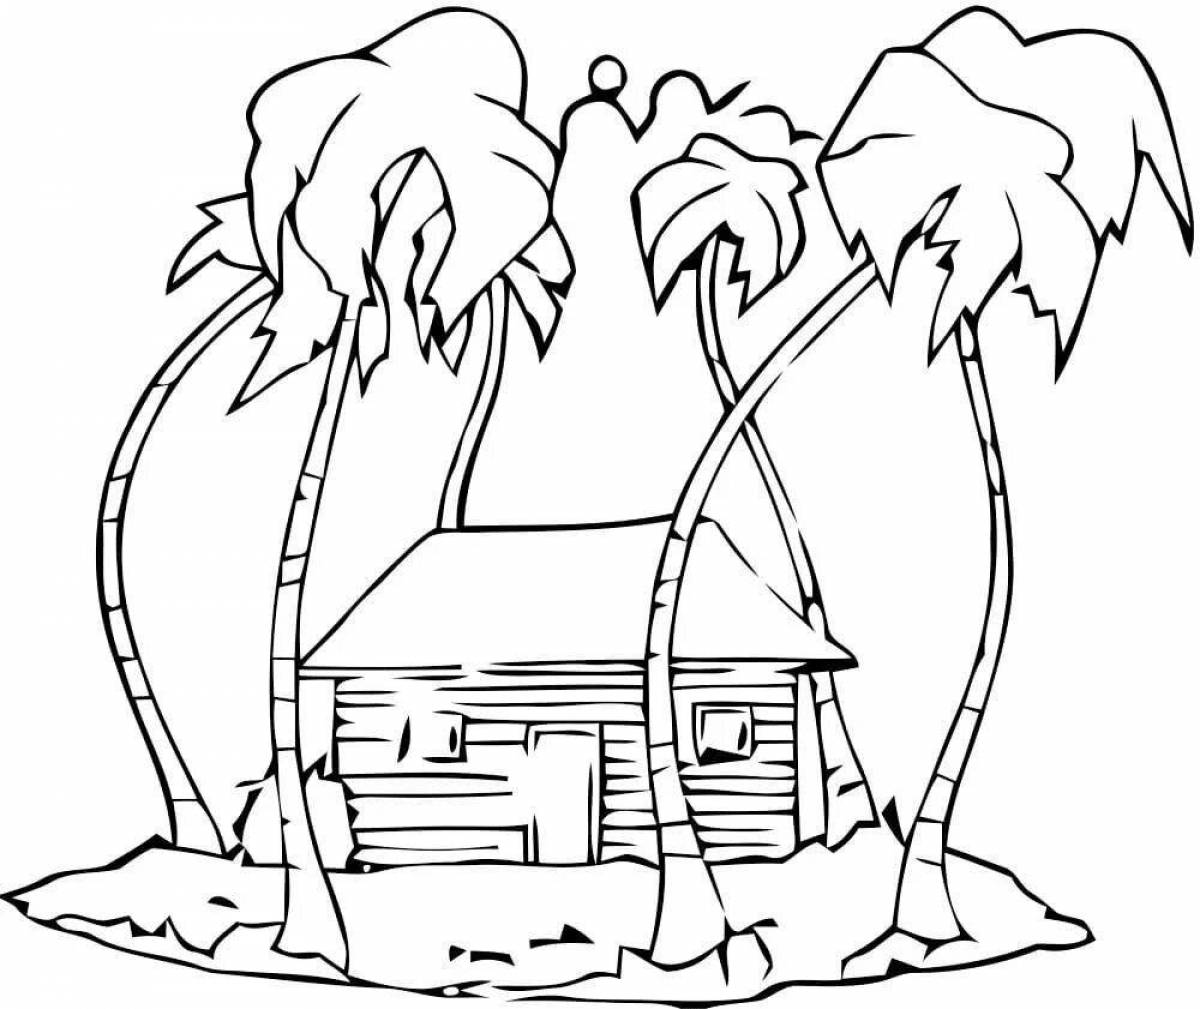 Coloring playful house nature